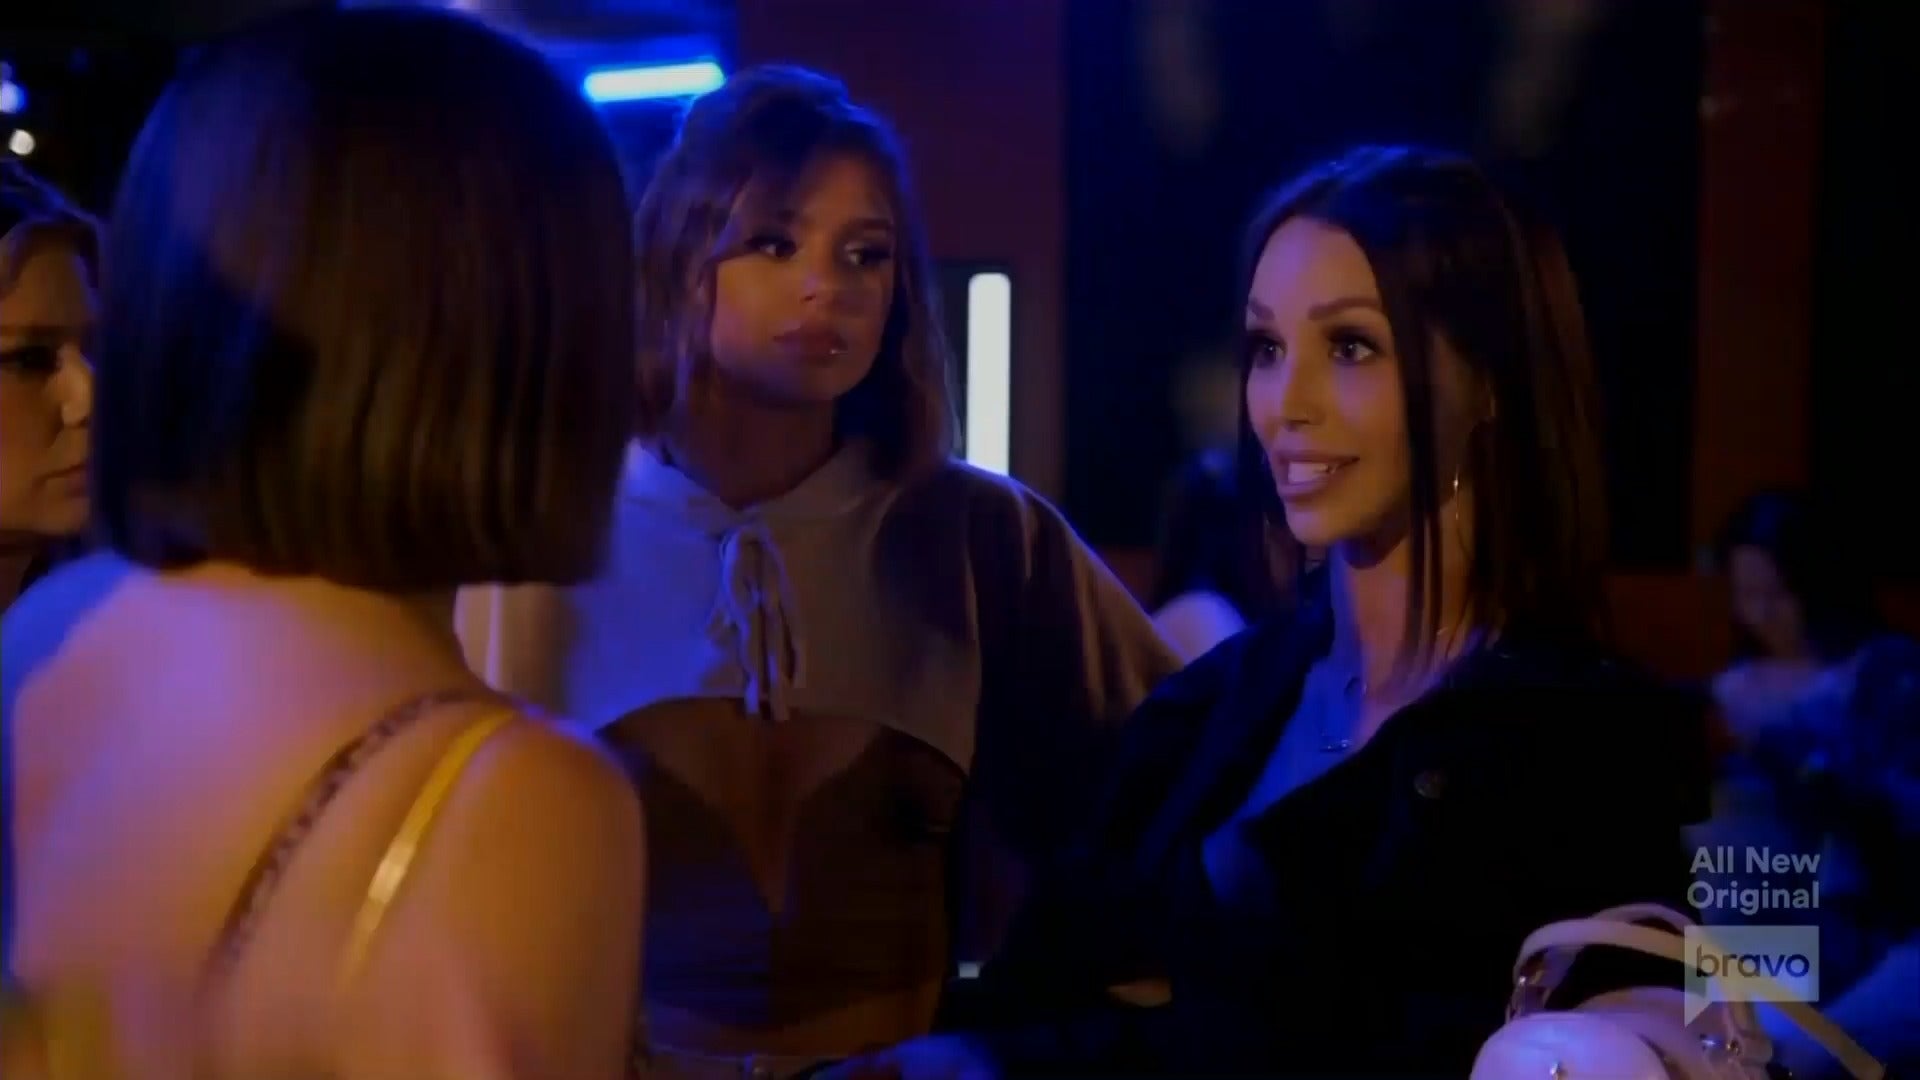 Vanderpump Rules Scheana Shay Tears Up Over Katie Maloney Promising to Watch Her World Burn (Exclusive) Entertainment Tonight